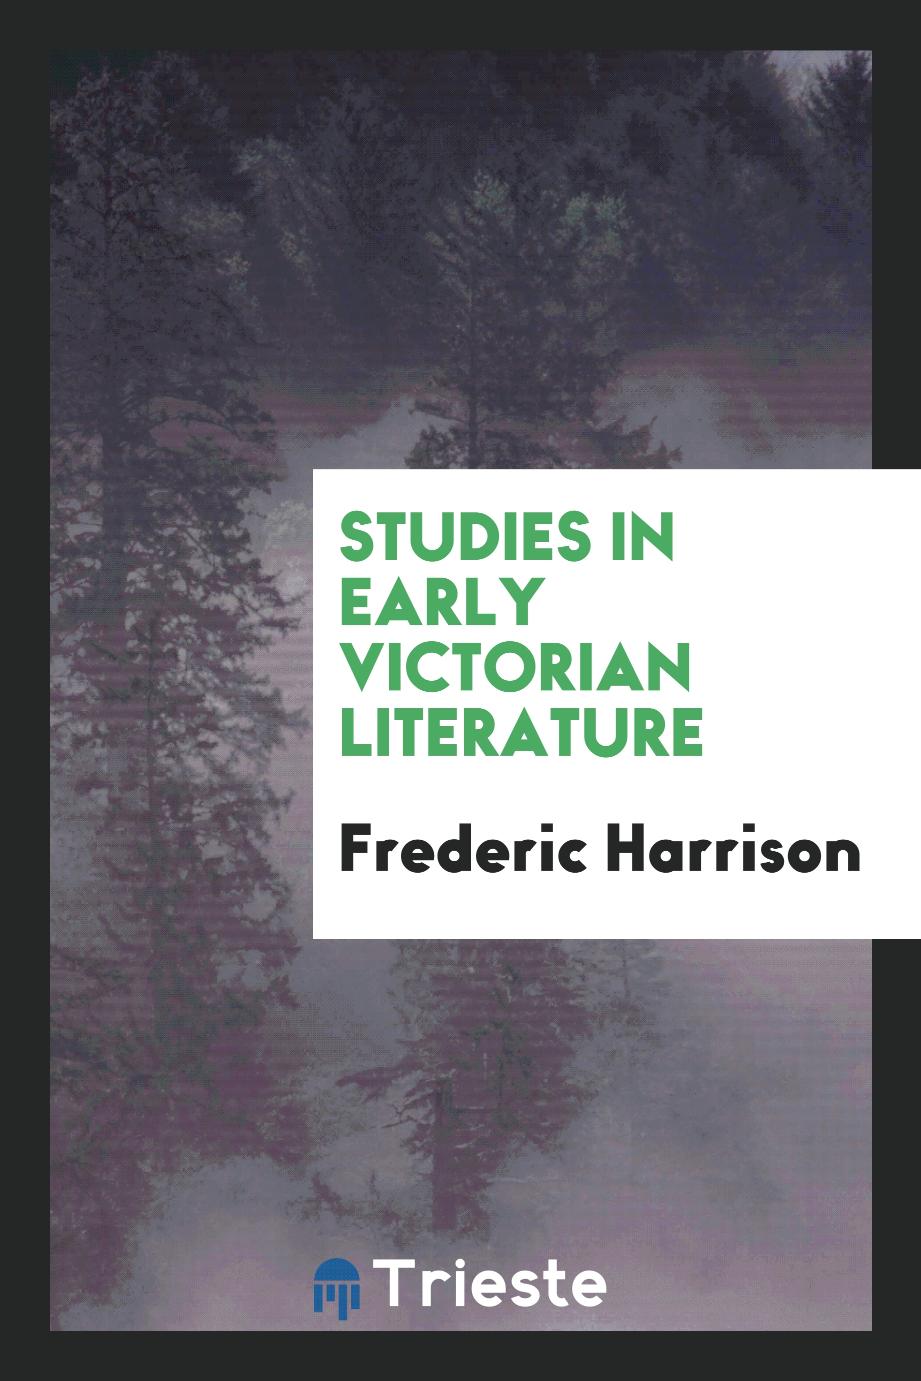 Studies in early Victorian literature